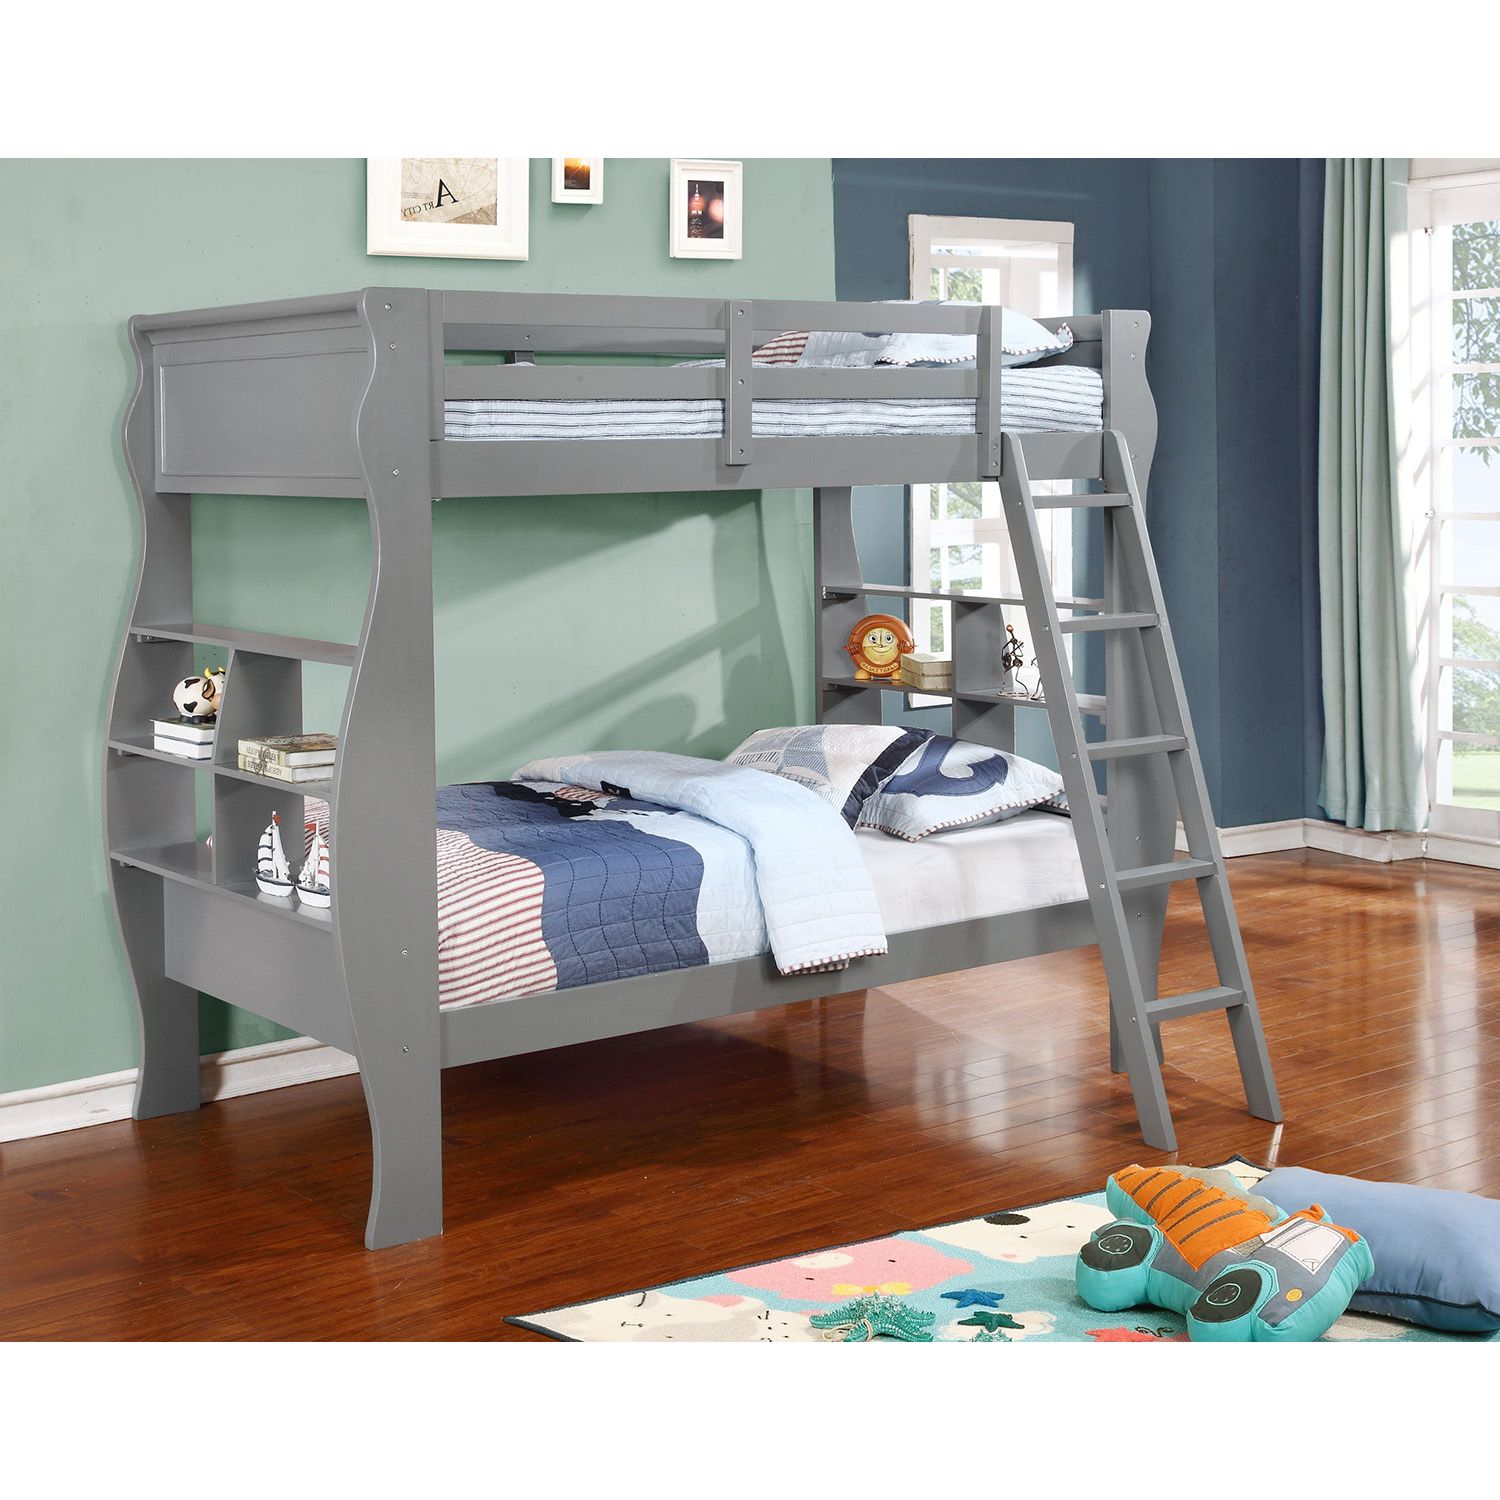 Casey Twin Bunk Bed – Select Color